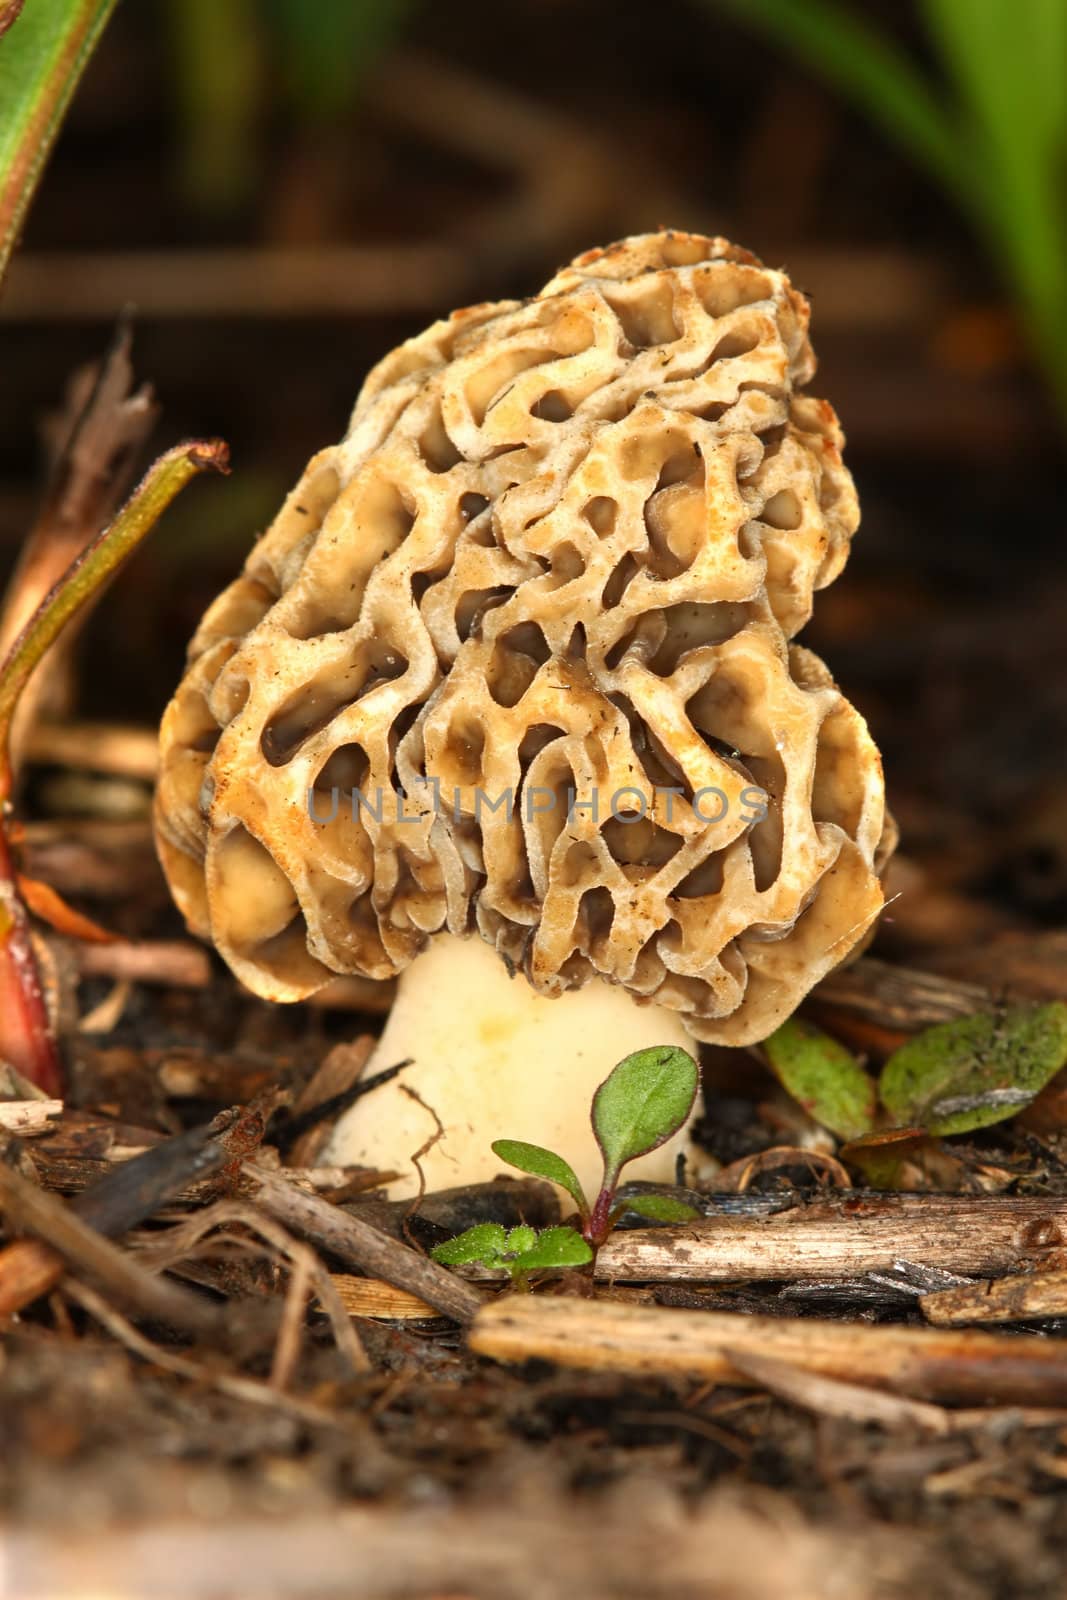 Morel in Illinois by Wirepec